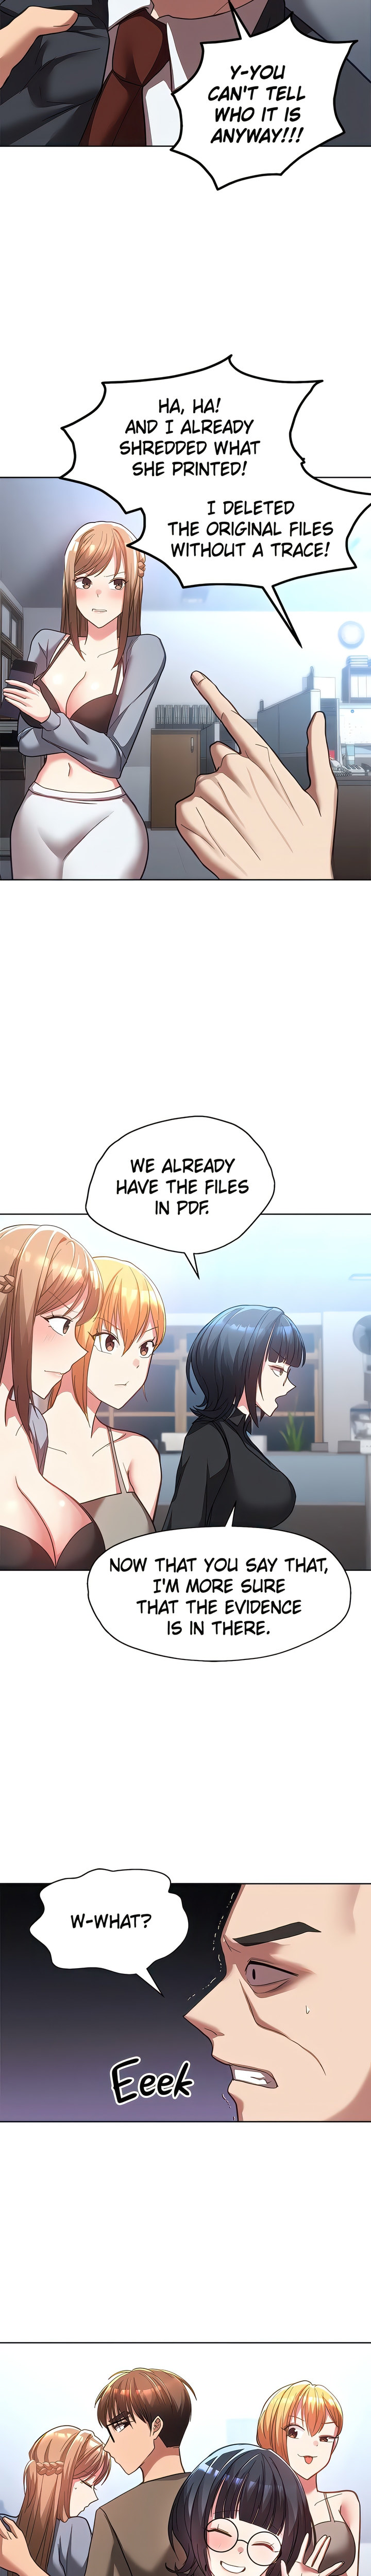 Girls I Used to Teach - Chapter 41 Page 4